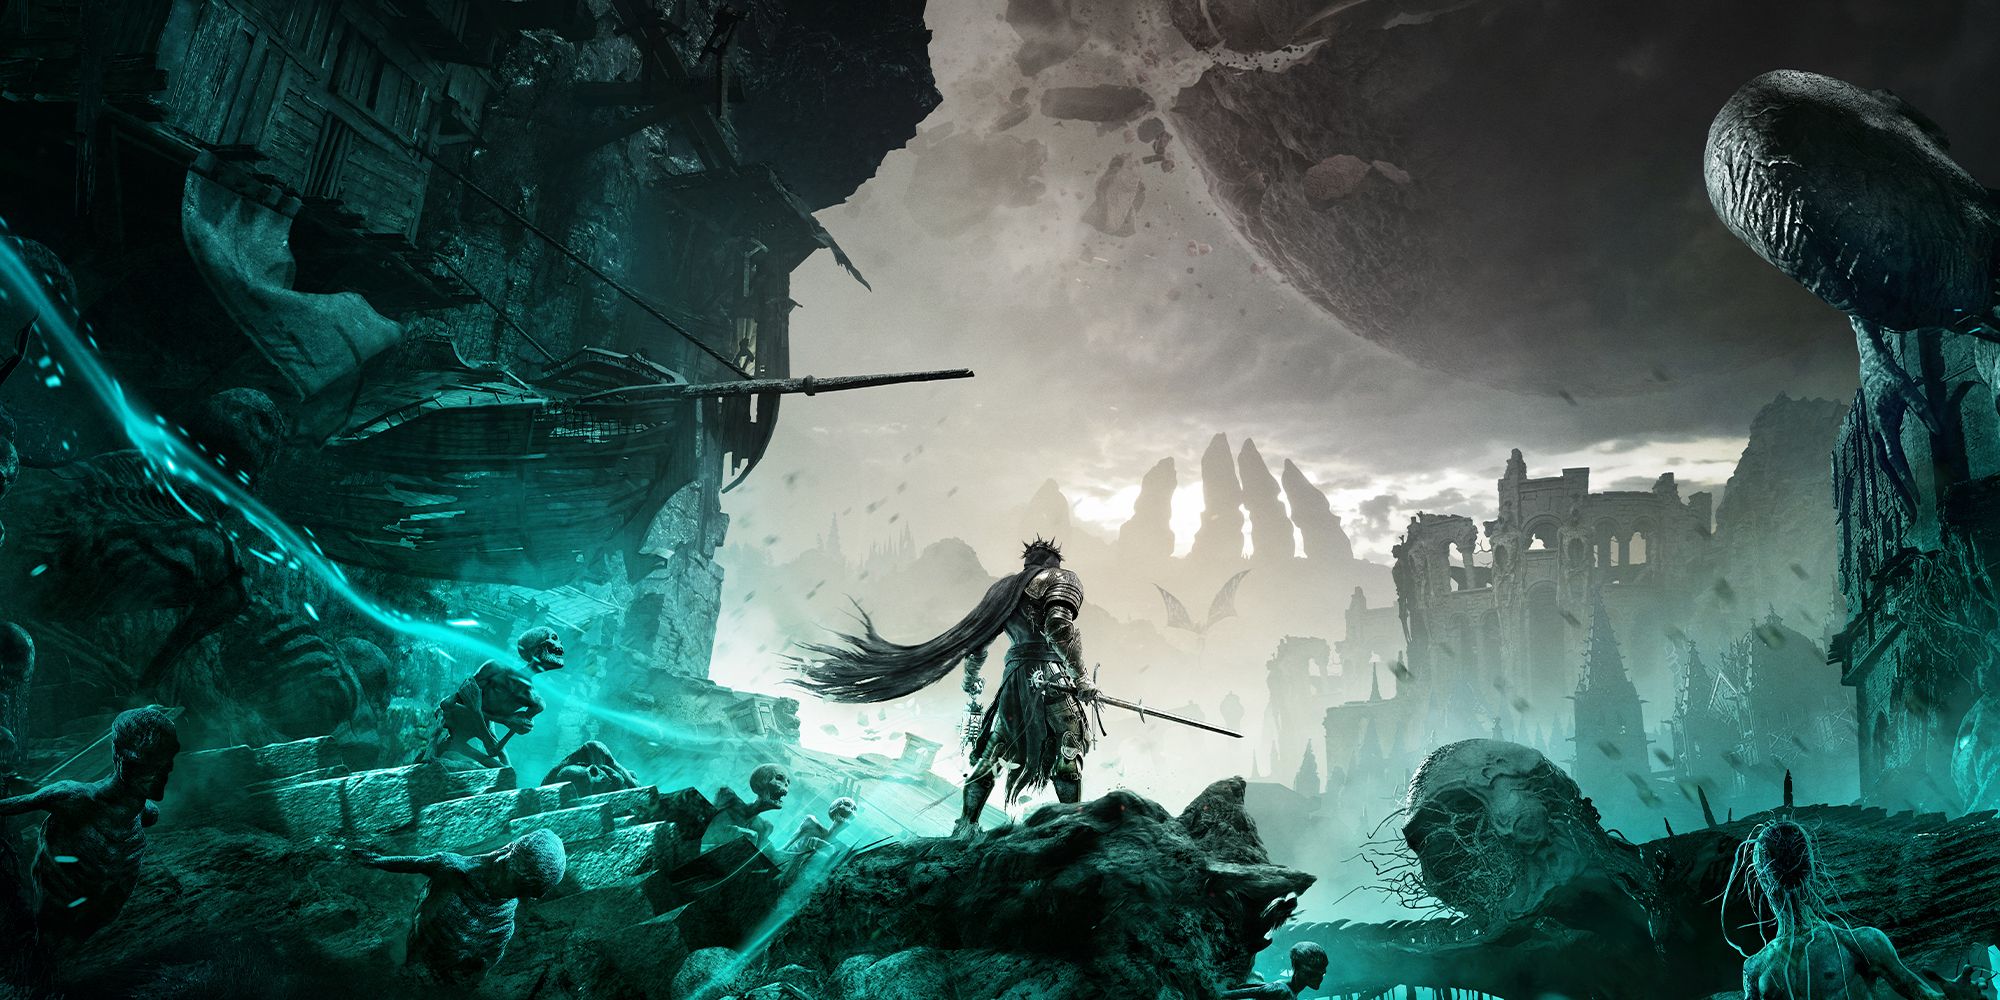 Lords of the Fallen cover art showing the player as they enter the teal-hued spirit world of Umbral